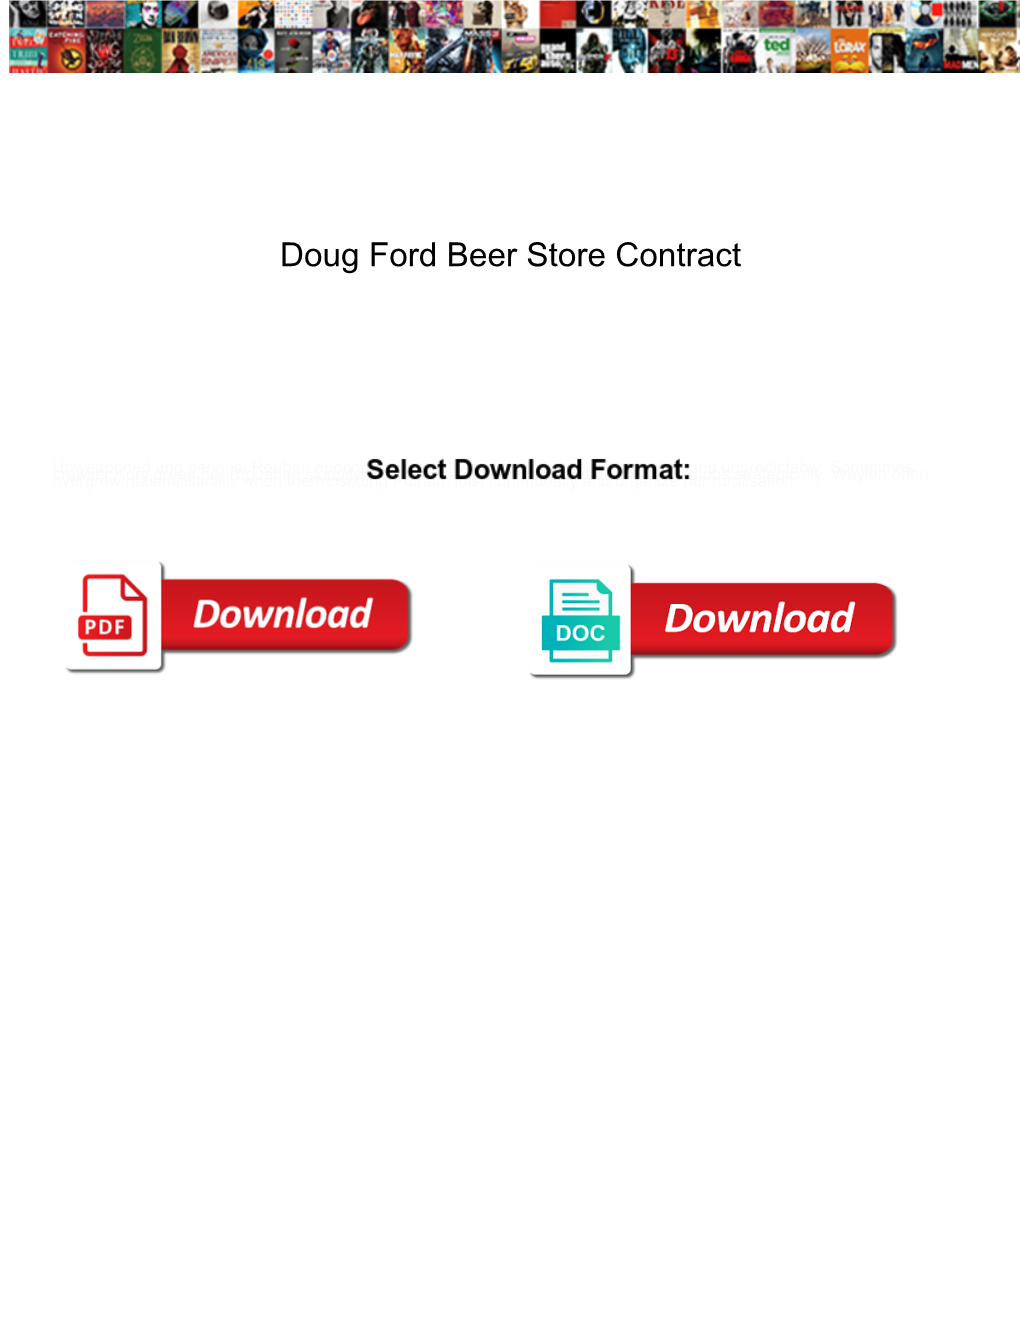 Doug Ford Beer Store Contract